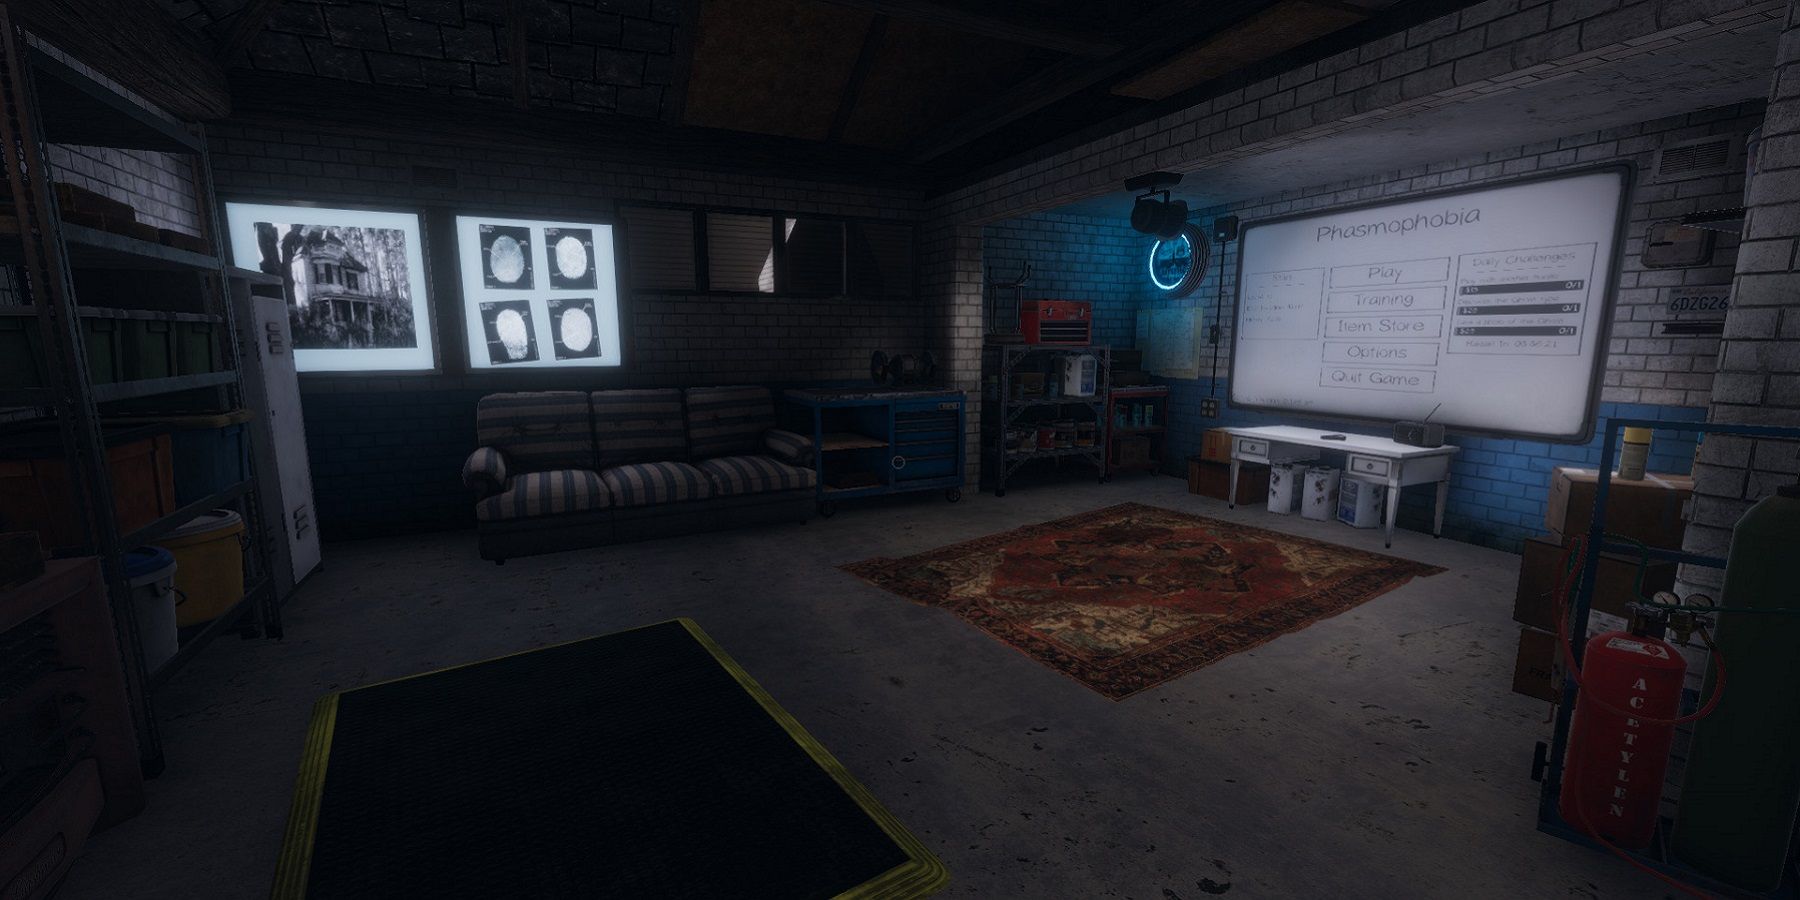 Screenshot from Phasmophobia showing the main area at the start with the whiteboard to the right.